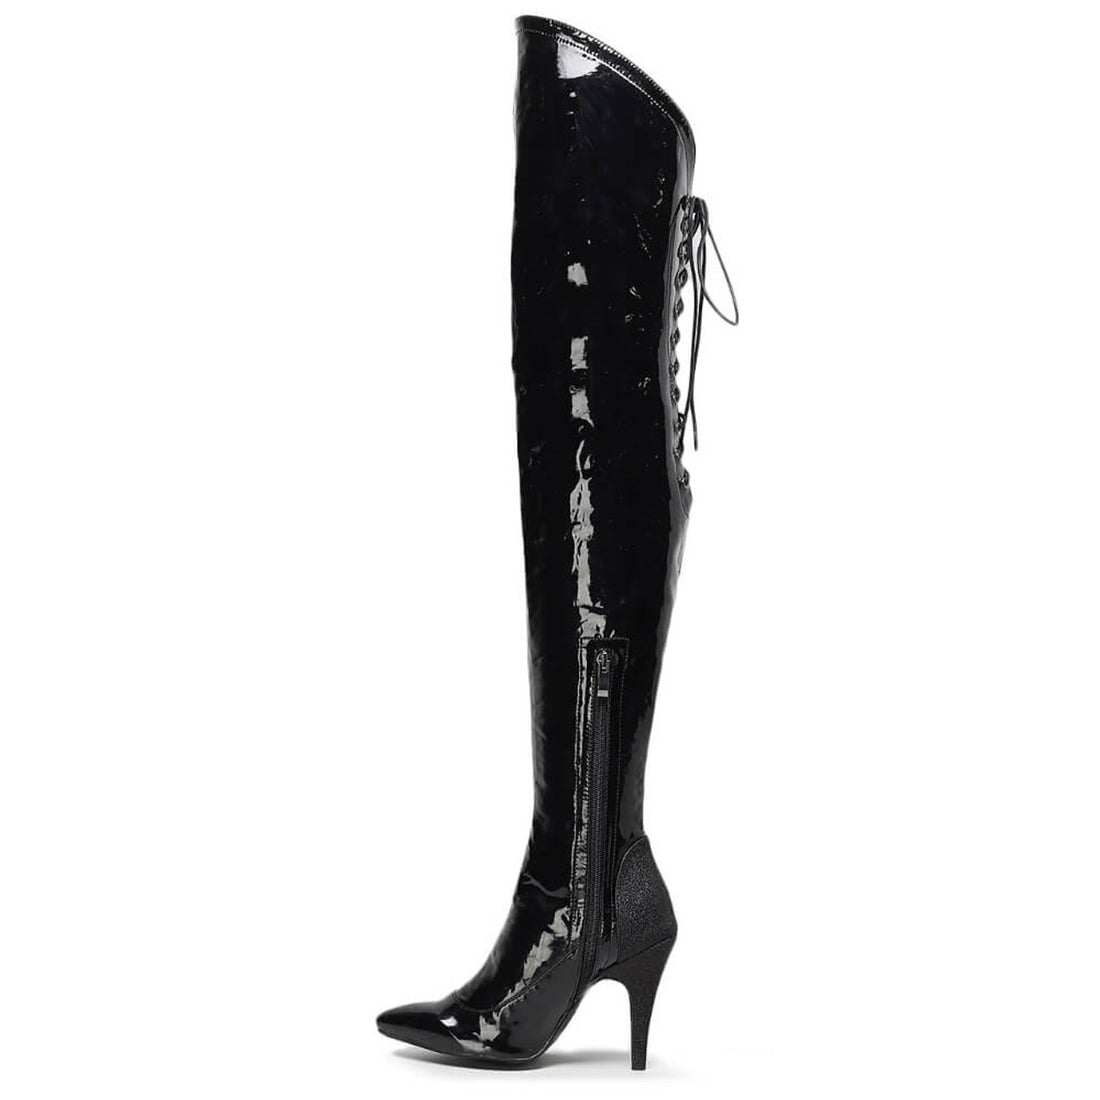 Savage Thigh High - By Kiira Harper - Closed Pointed Toe Wet Look With Sparkle Heel Dance Boots (Street Sole)